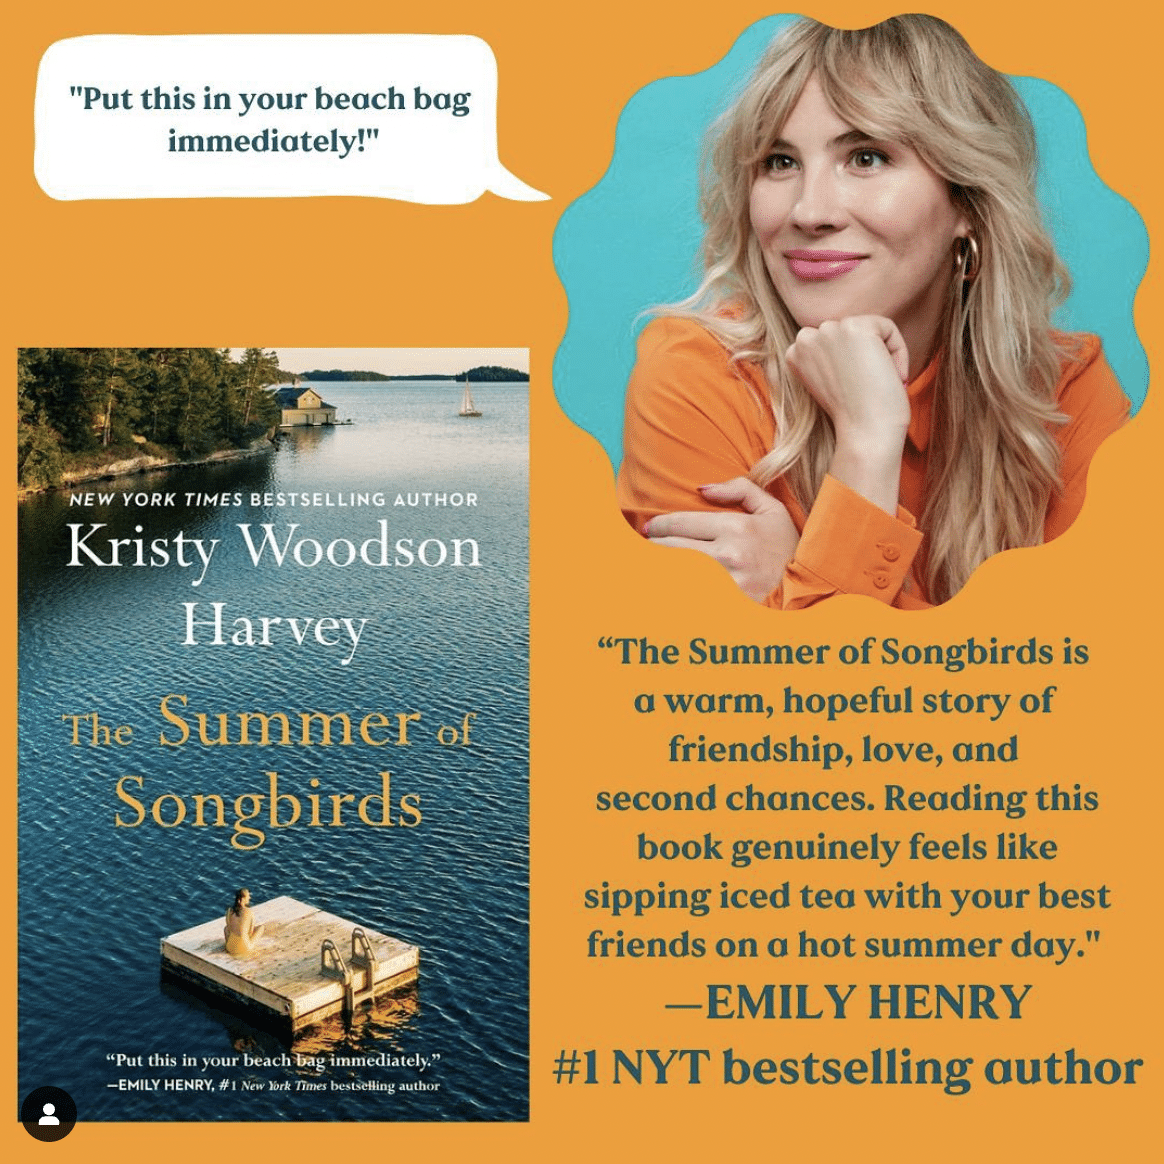 Emily Henry Endorsement for The Summer of Songbirds - amazon